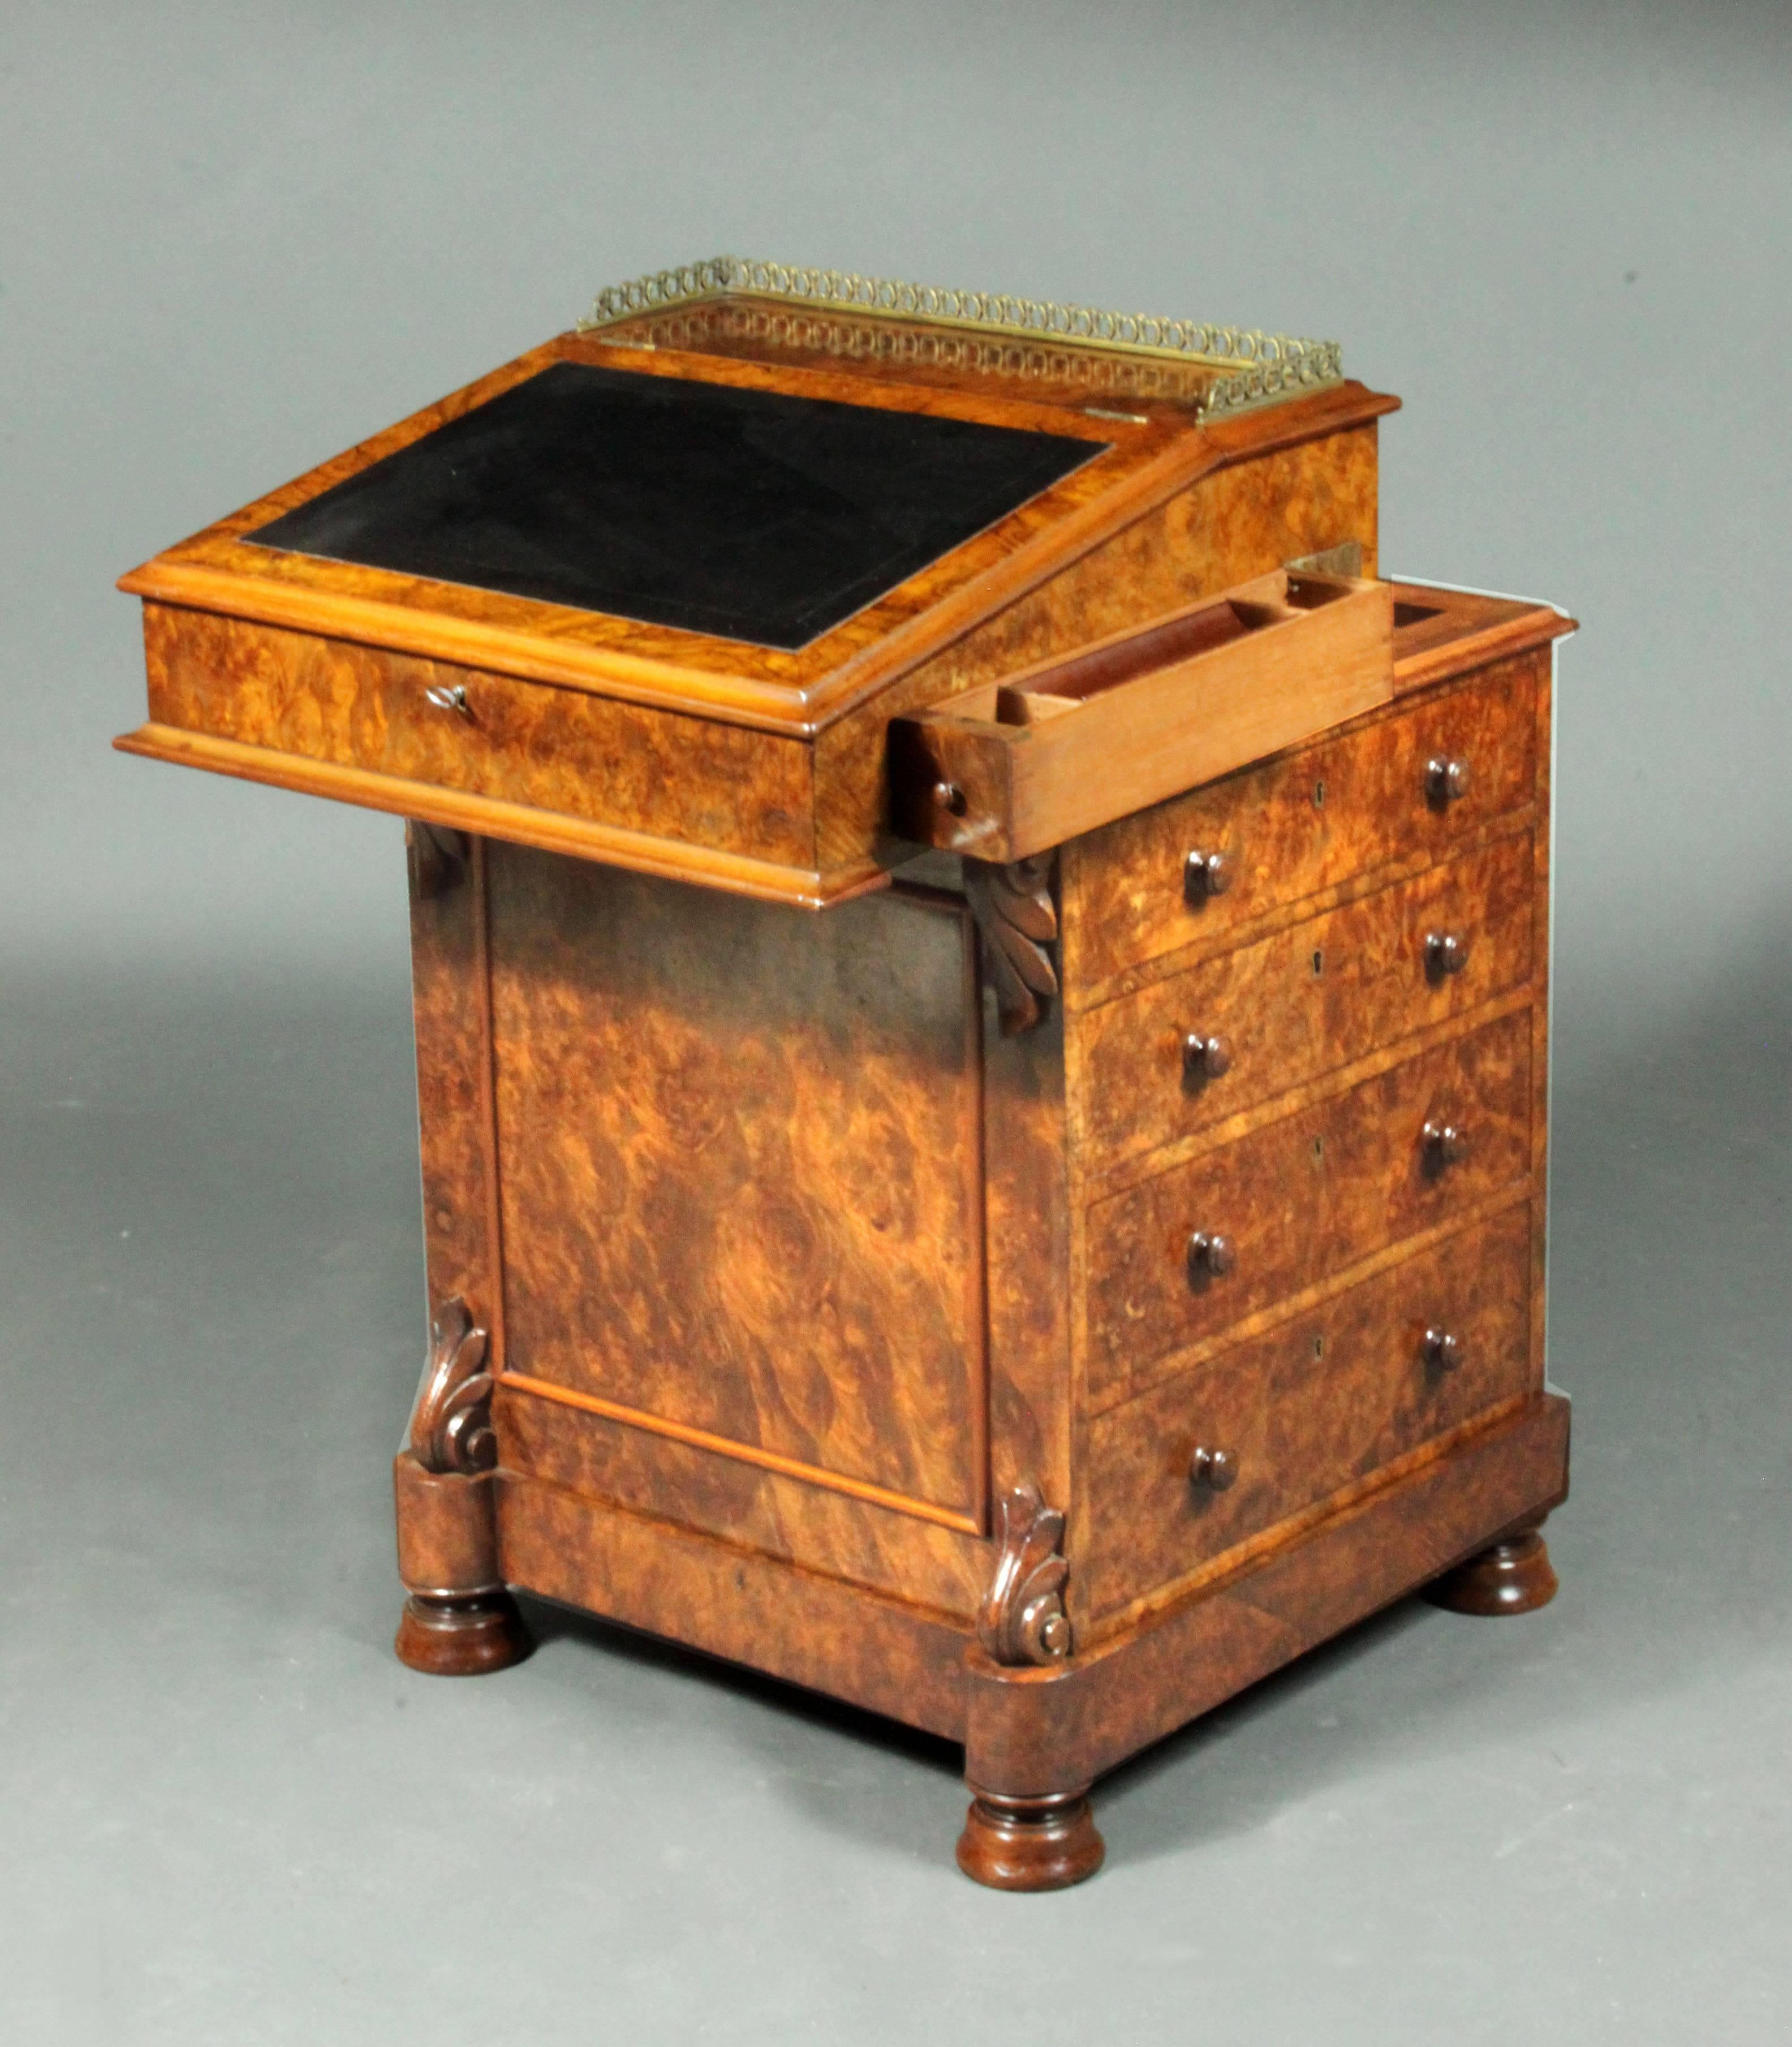 A fine early Victorian Davenport in burr walnut of good color and patina, with fitted interior in bird's-eye maple; ink drawer and drawers on the right side and false drawers on the left; the drawers with VR locks, good paneled back - in very good